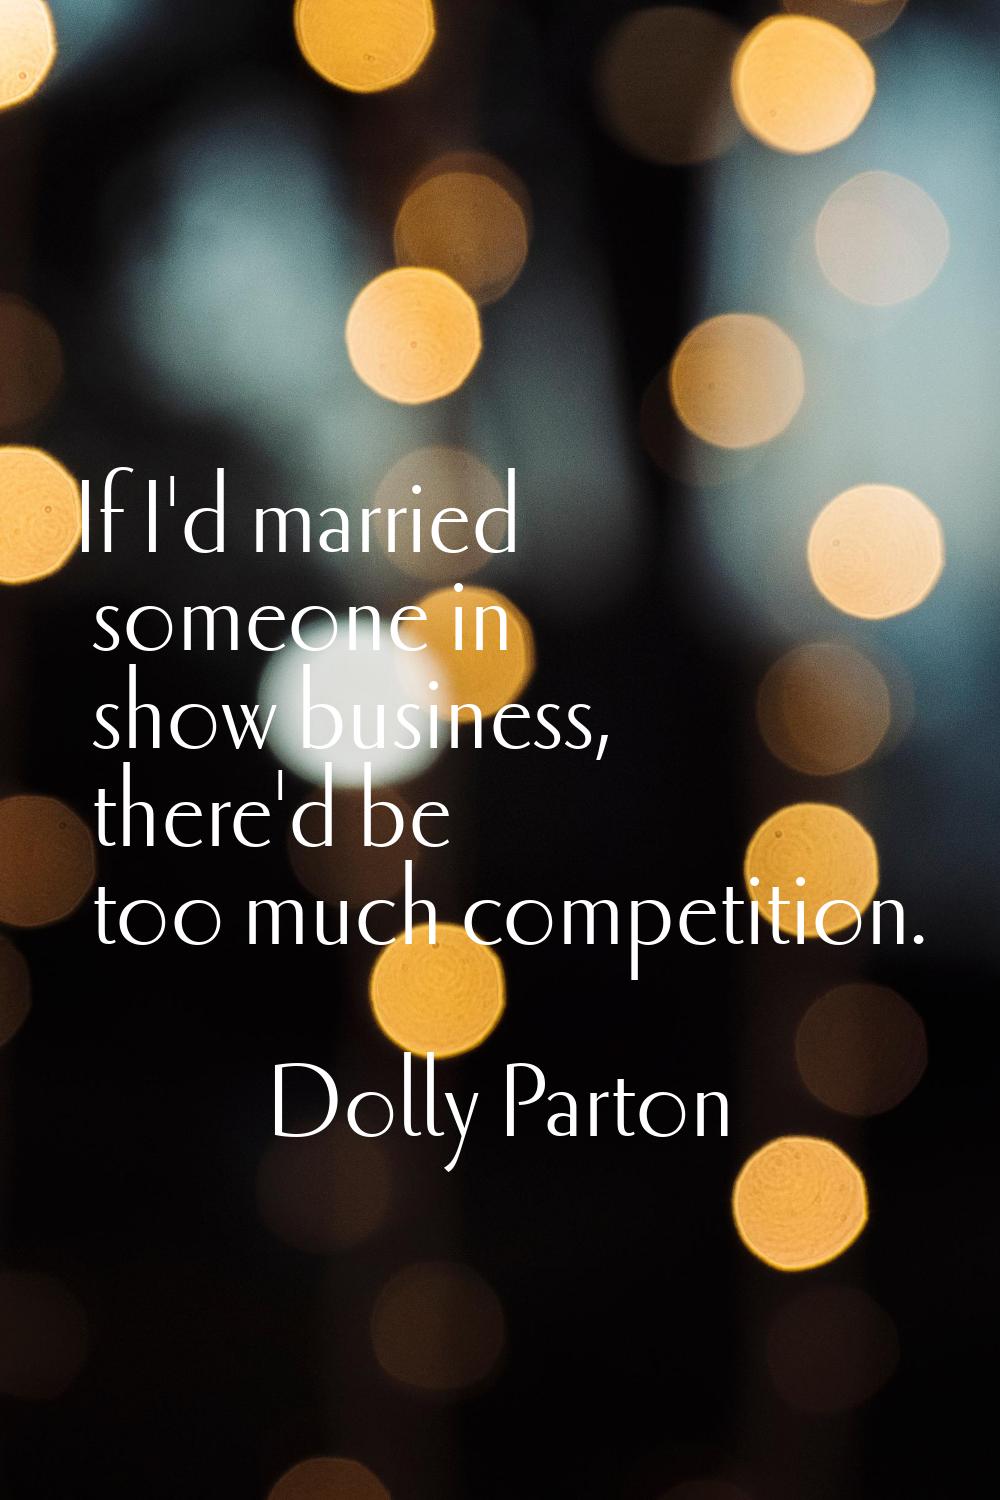 If I'd married someone in show business, there'd be too much competition.